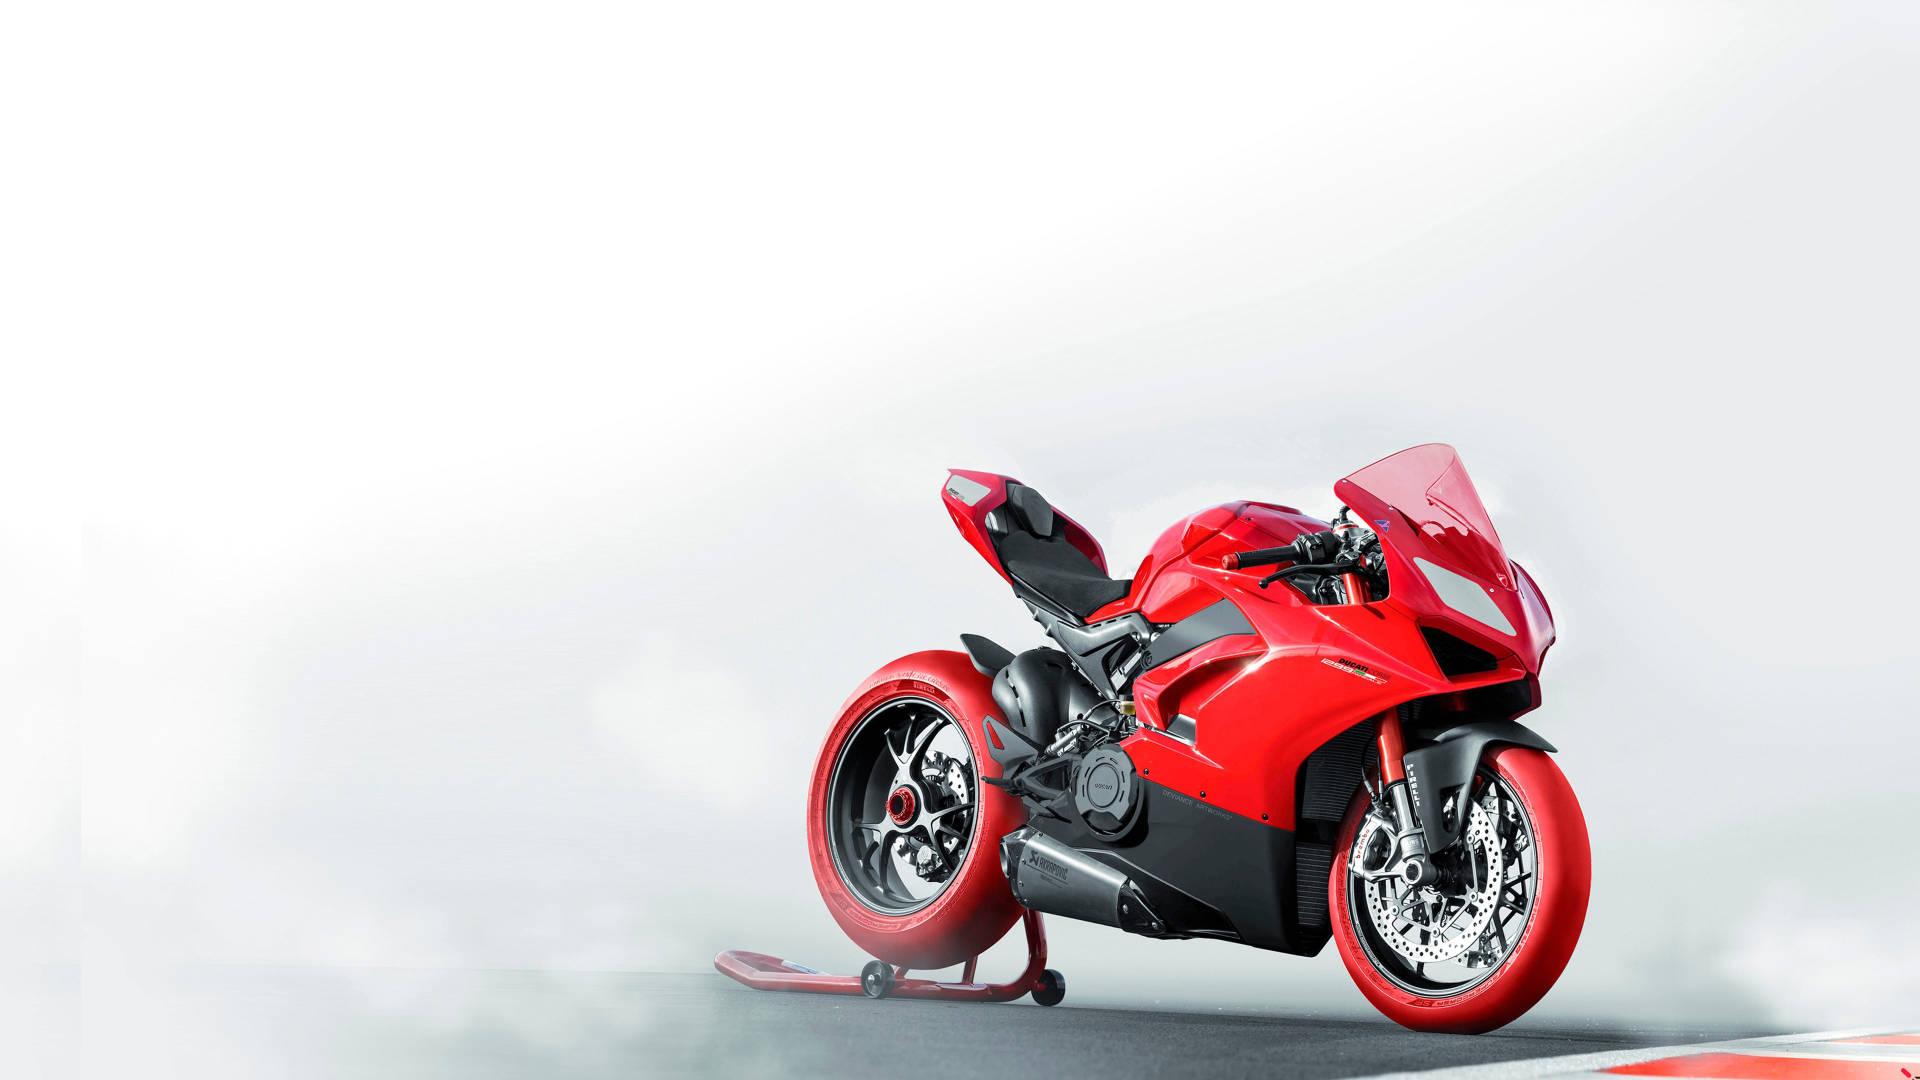 The Iconic Ducati Panigale V2 Wallpaper